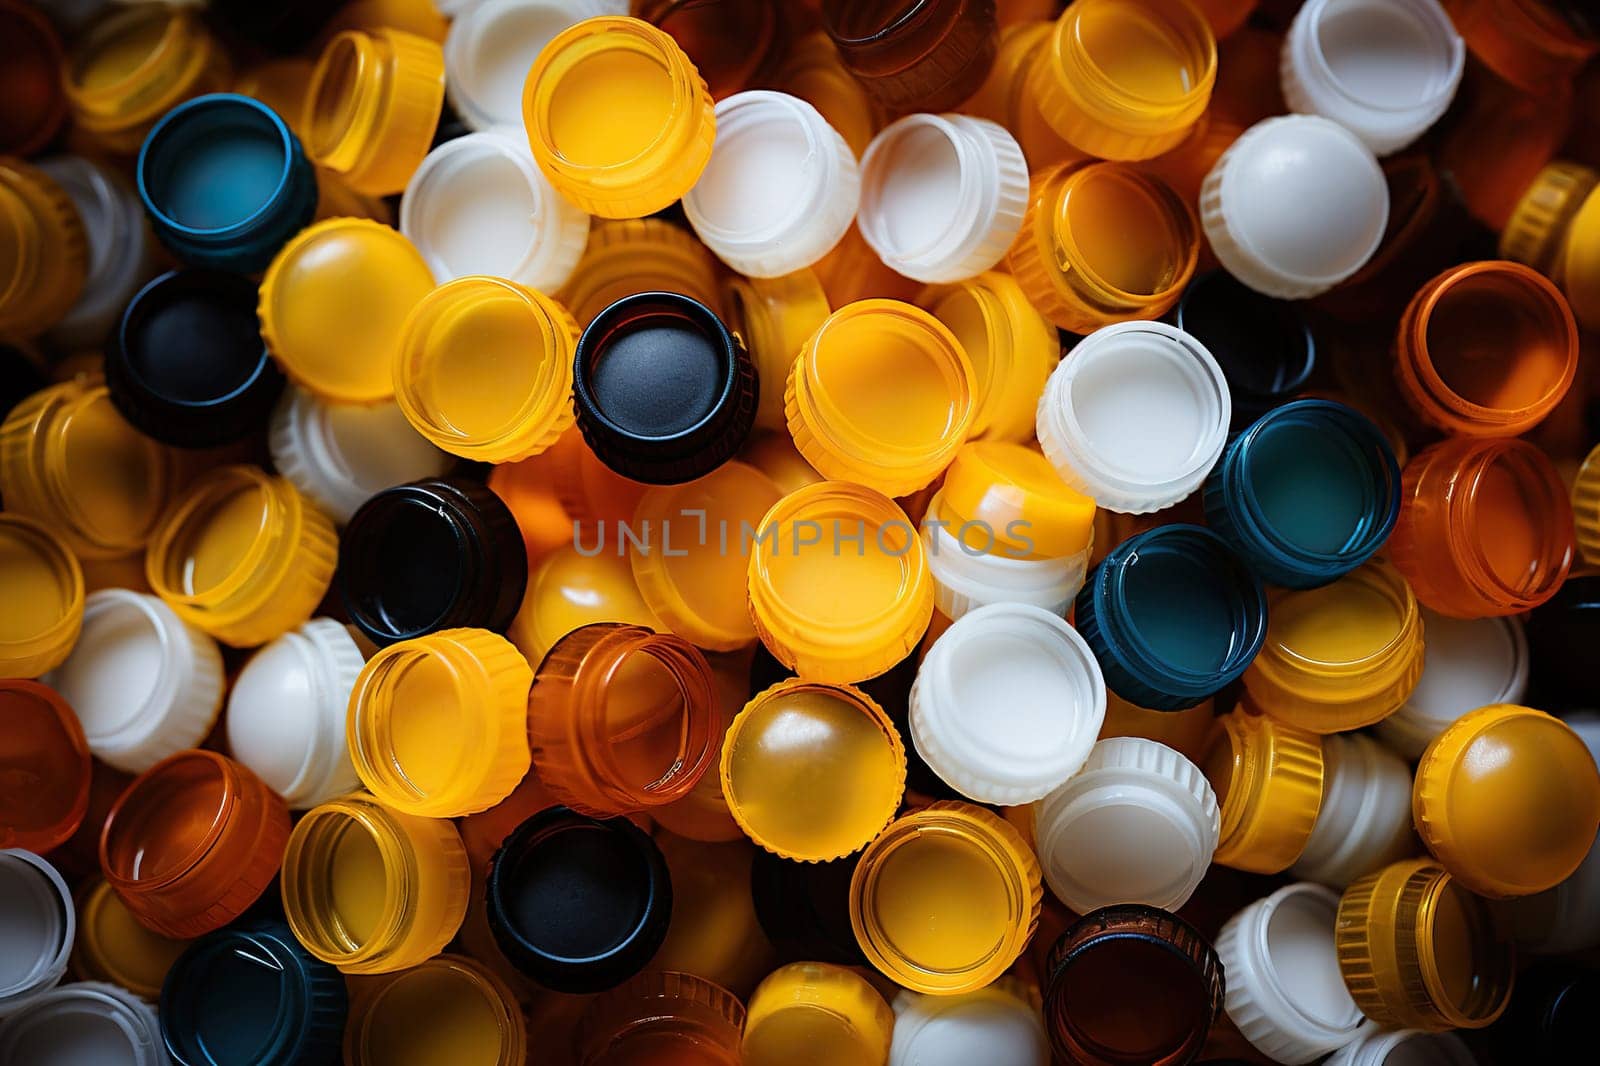 Plastic bottle caps, waste collected for recycling. Environmental protection concept.